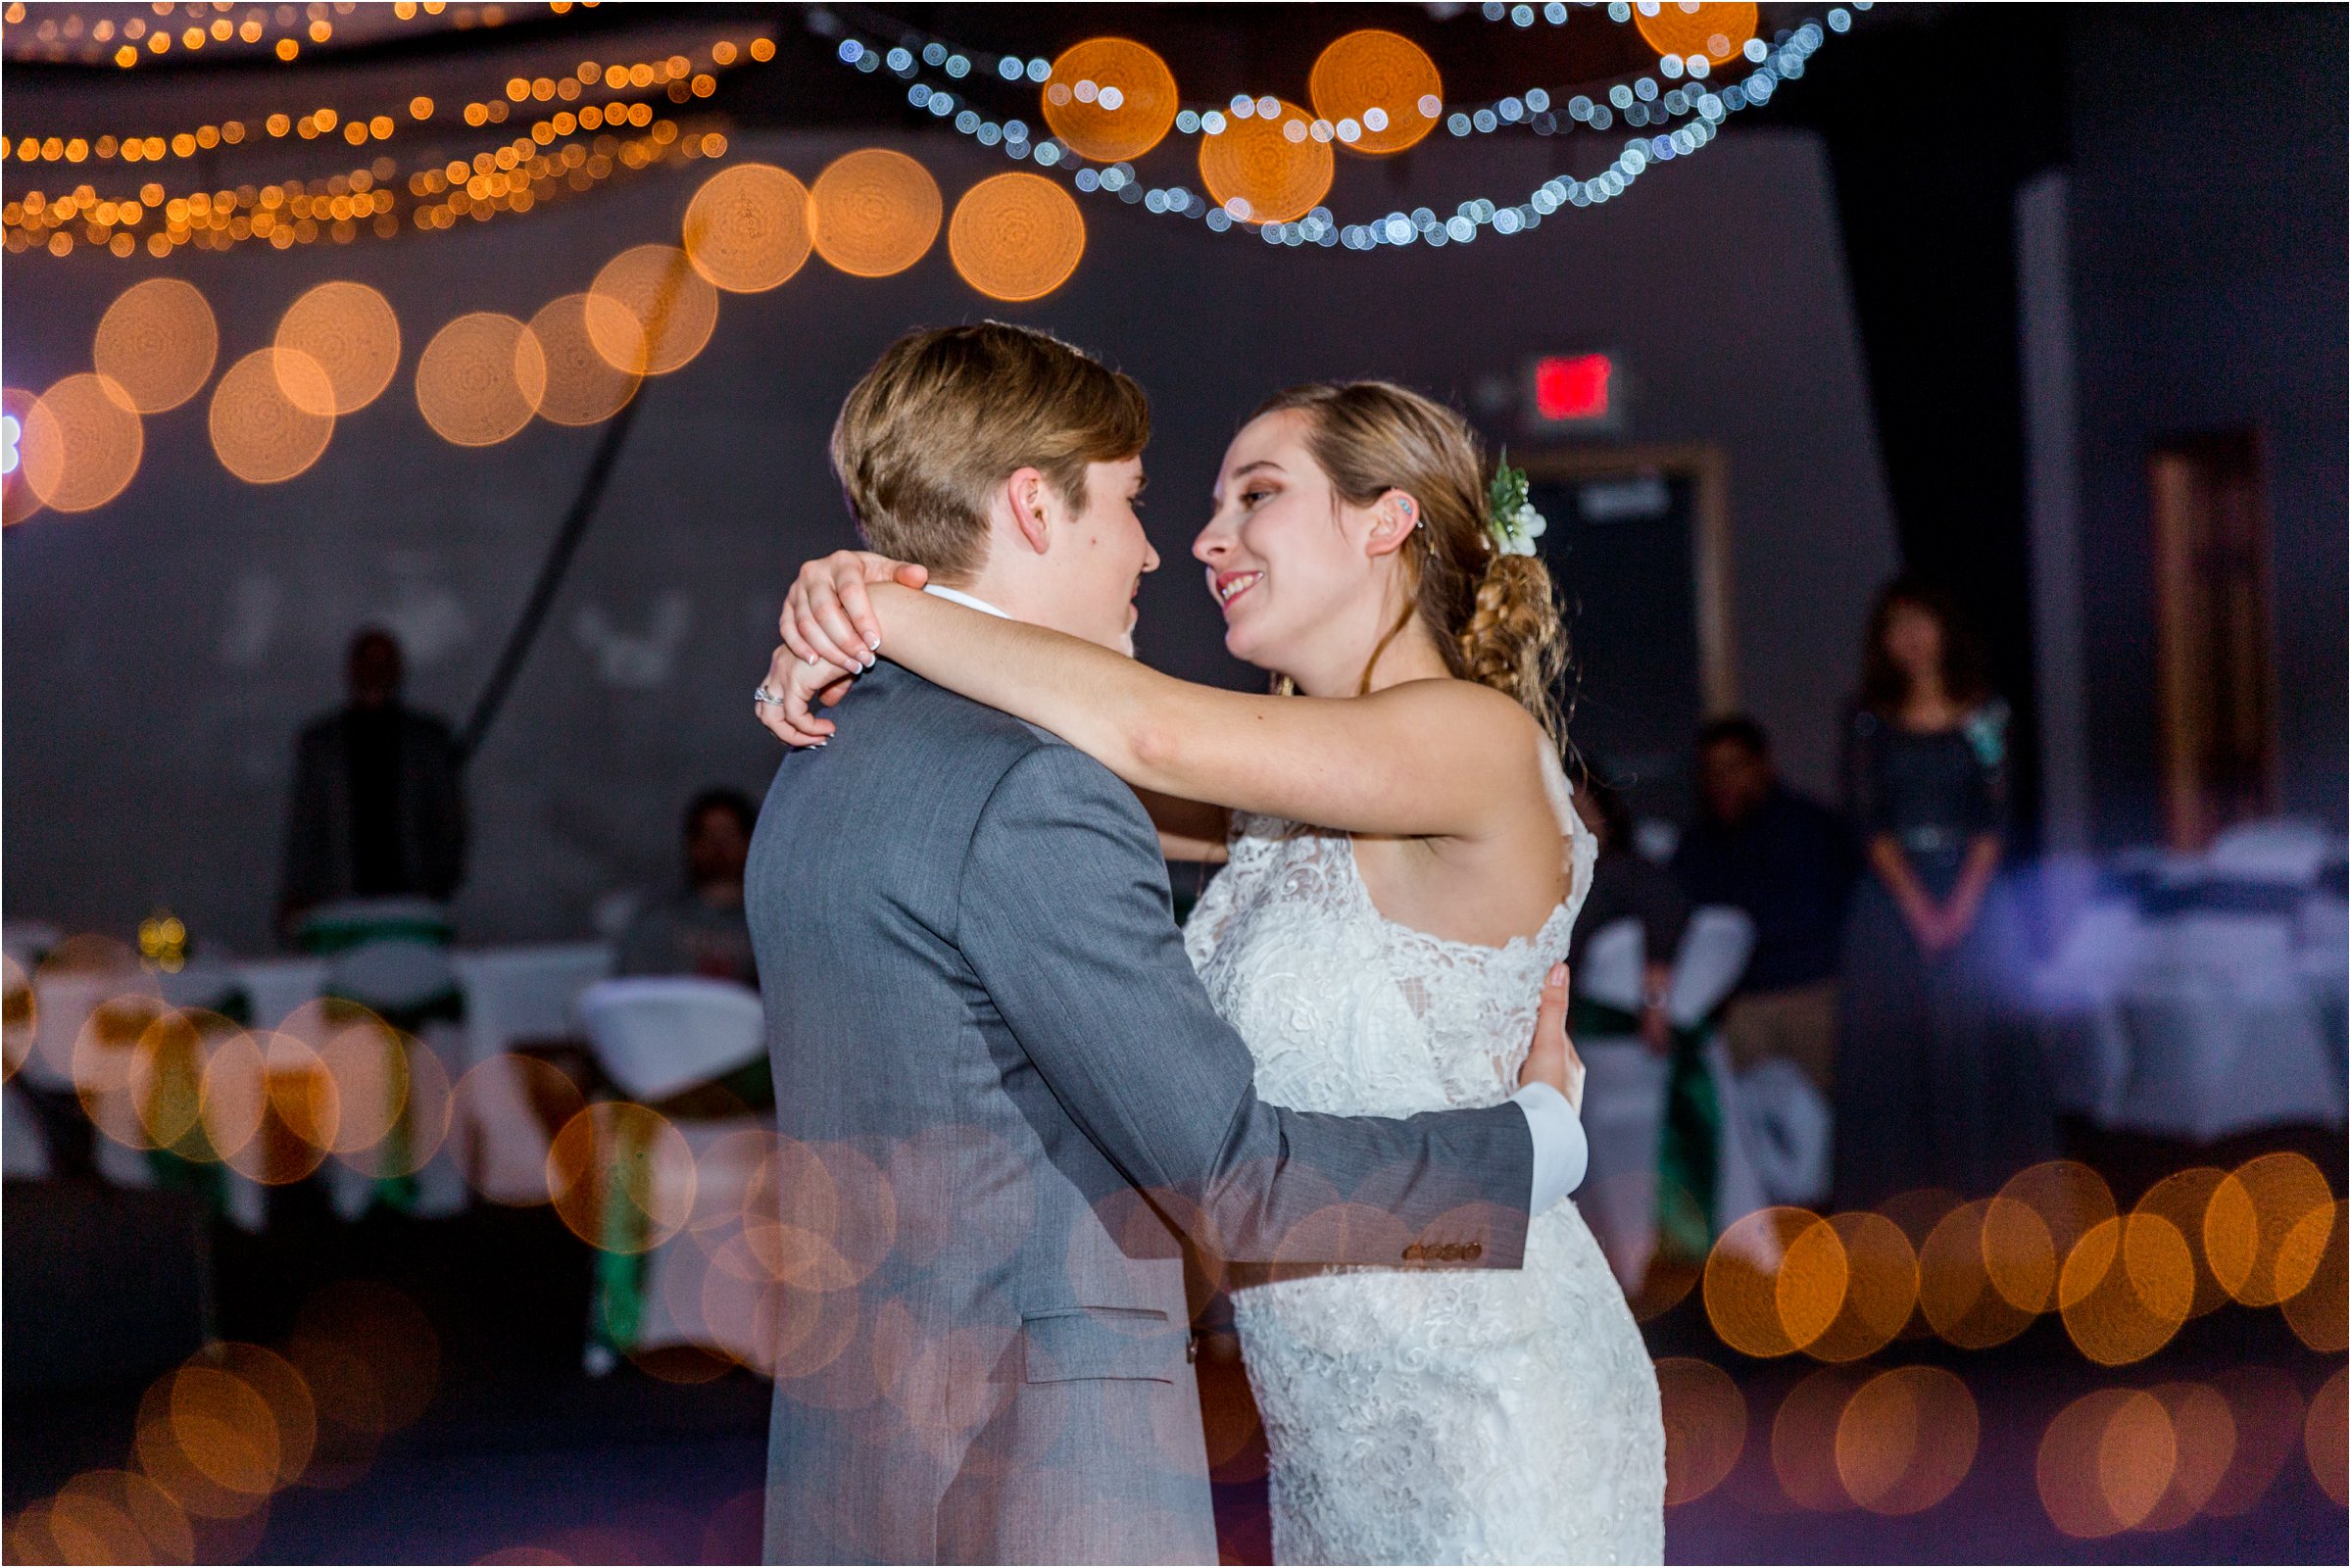 bride and groom dancing their first dance together as husband and wife at their wedding reception